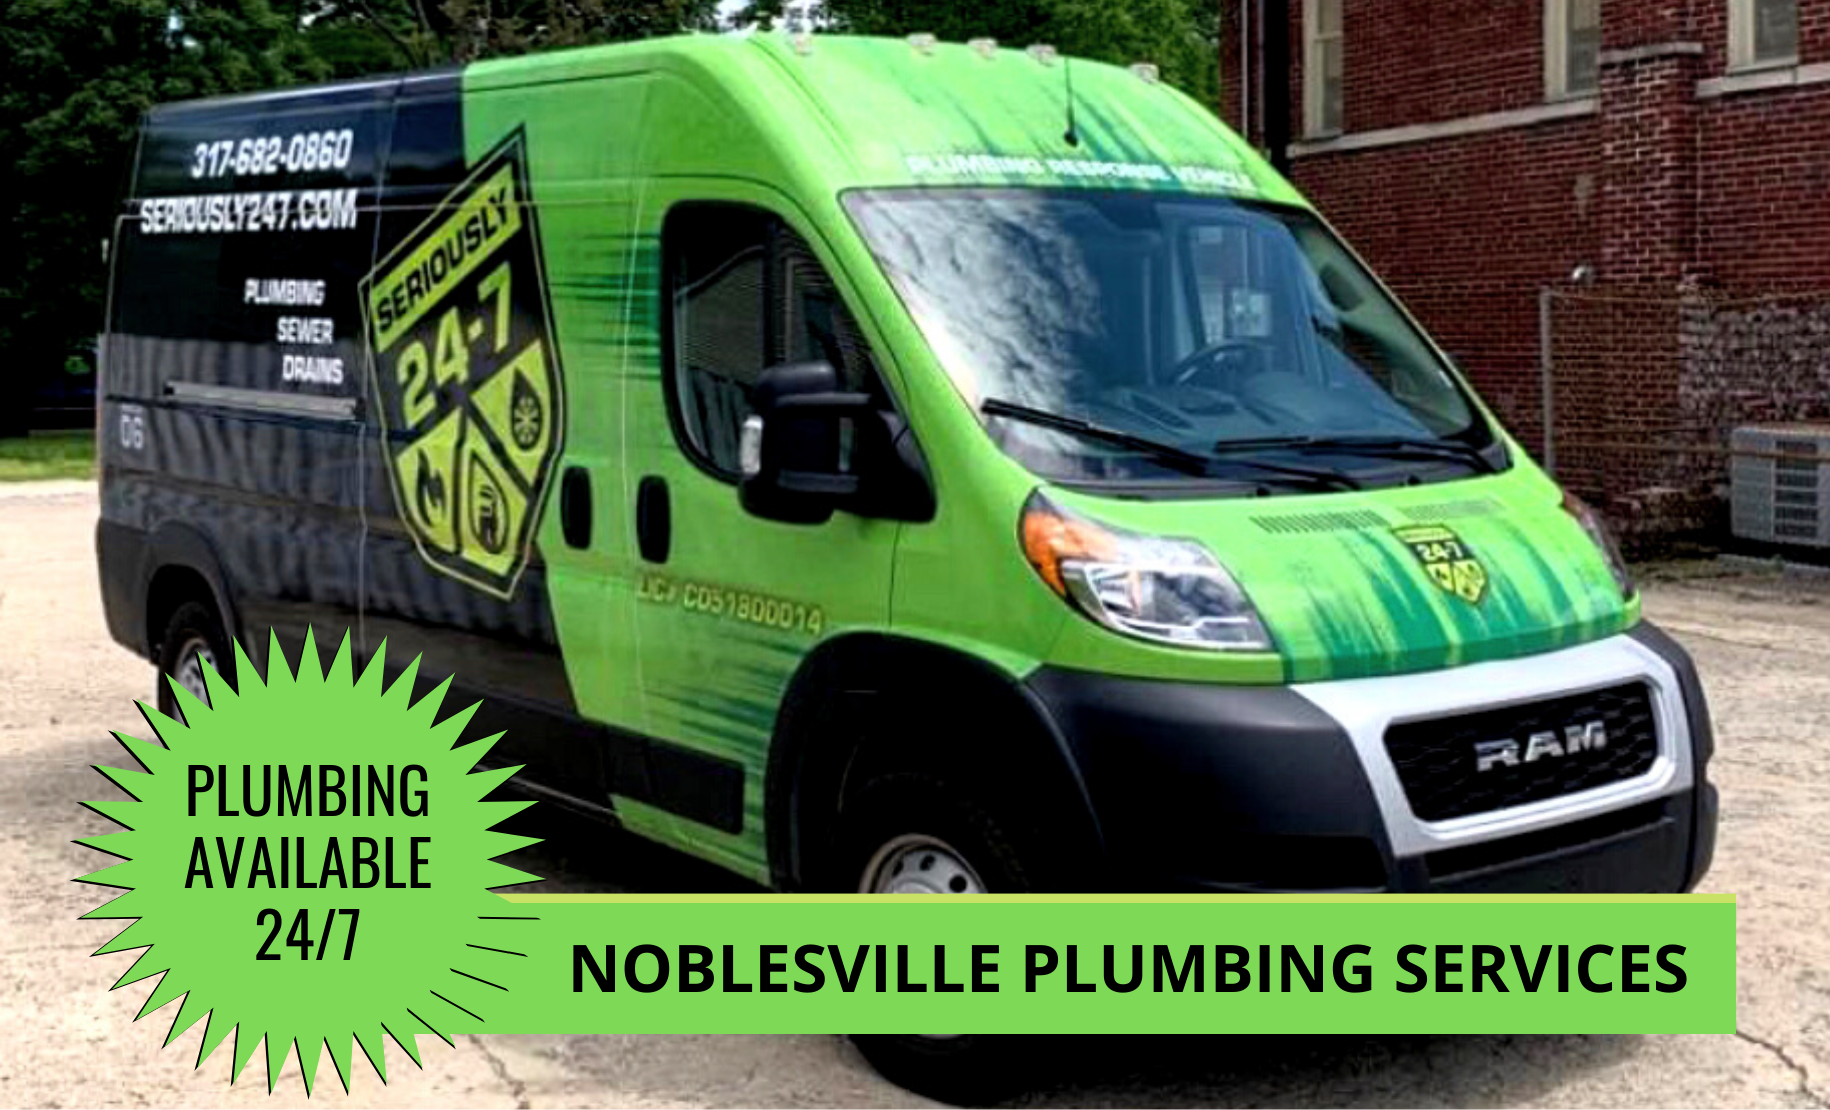 Noblesville Plumbing Services